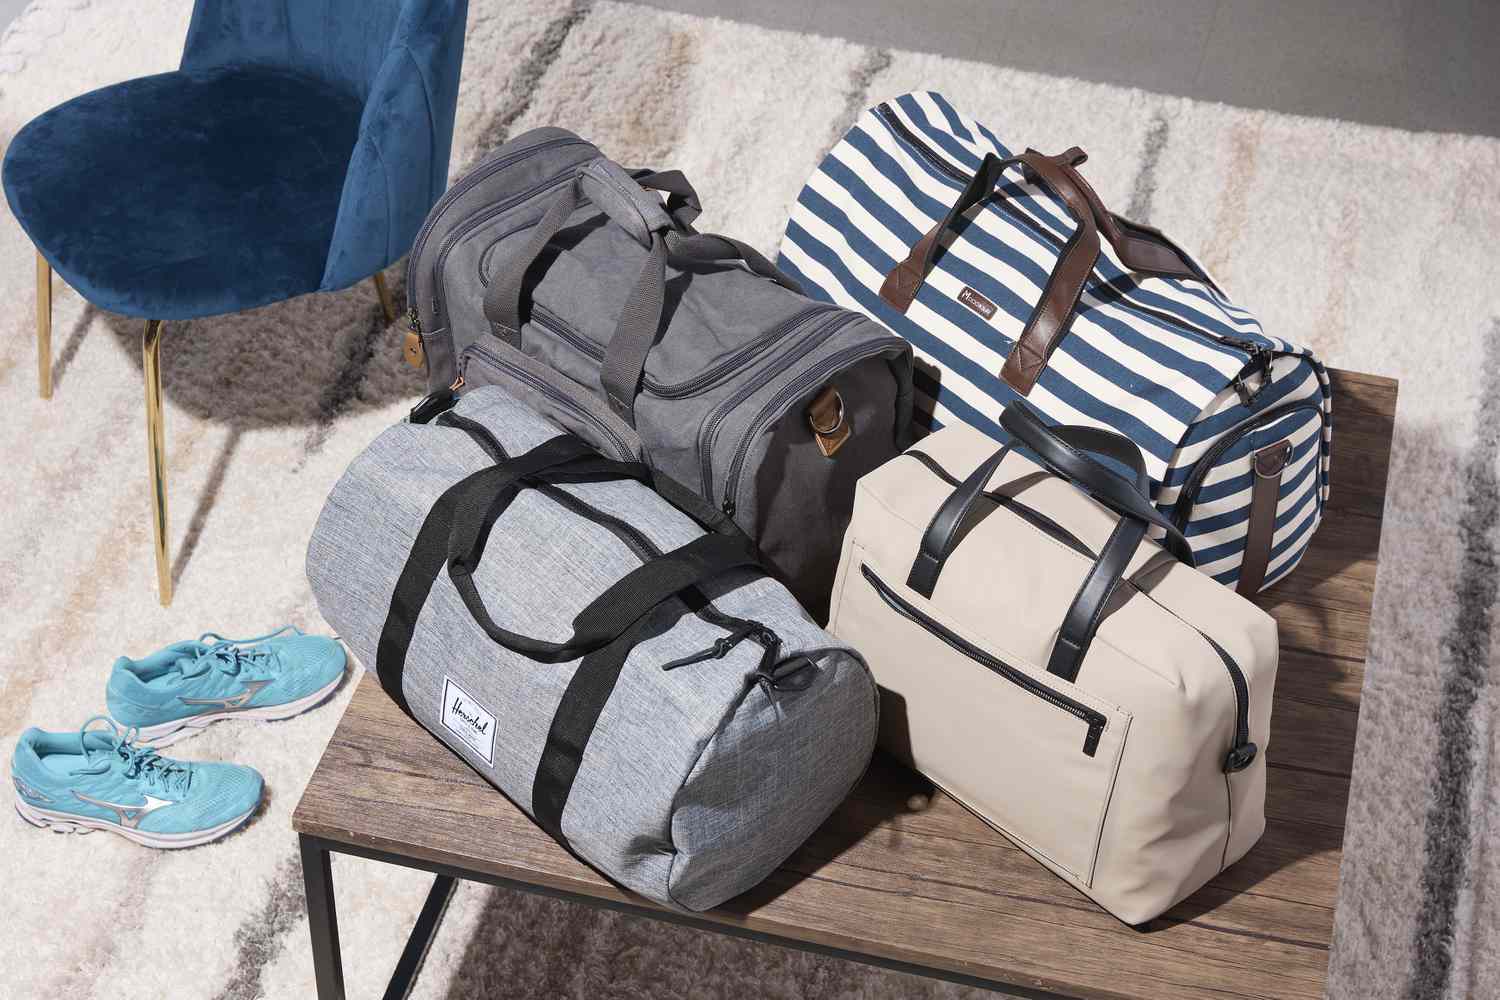 duffel-bag-gets-reinvented-for-tech-savvy-business-travel